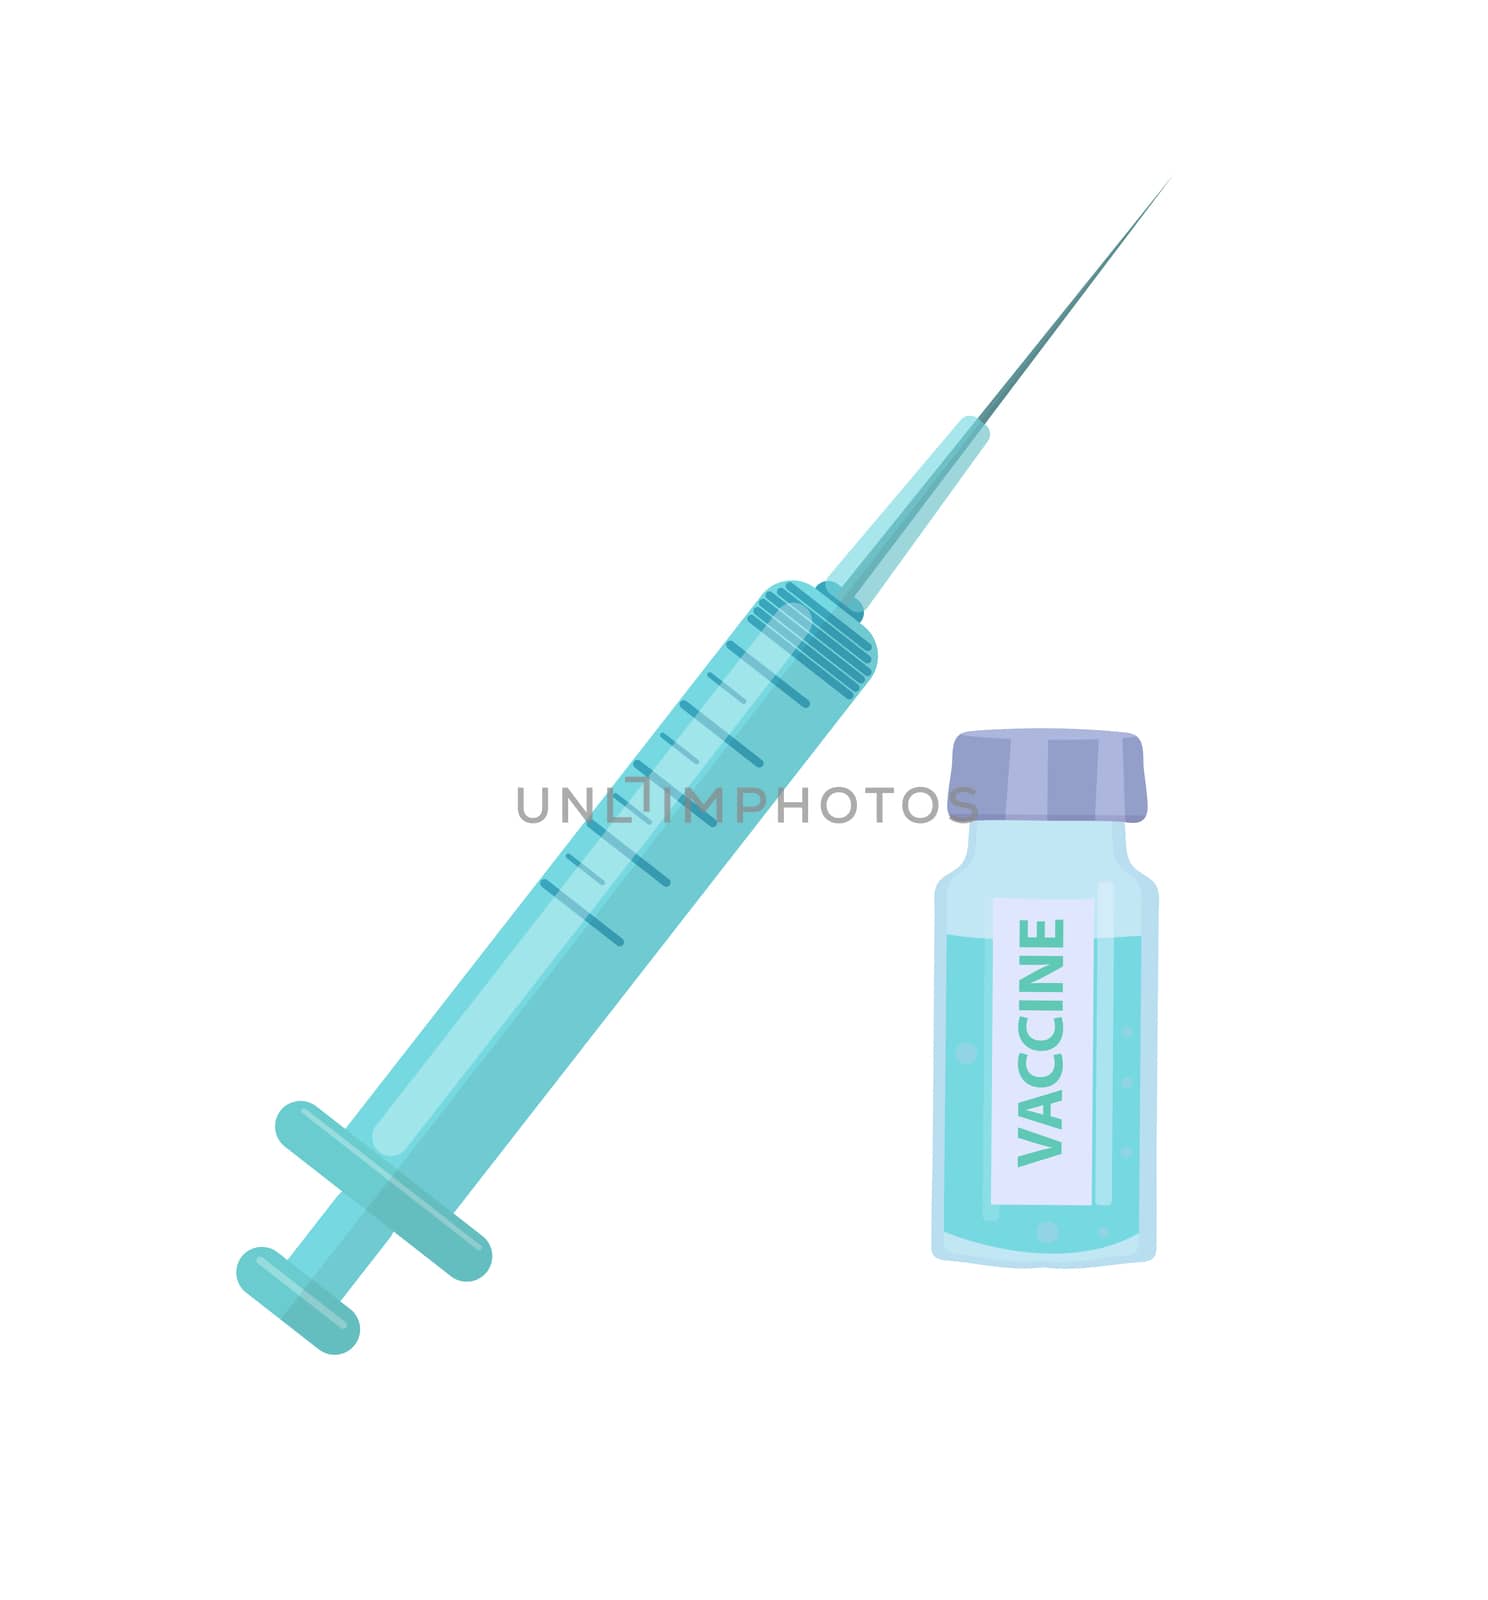 Vaccination protection against virus and disease. Syringe and glass jar with a vaccine, medicine concept icon flat style. Isolated on a white background. illustration.